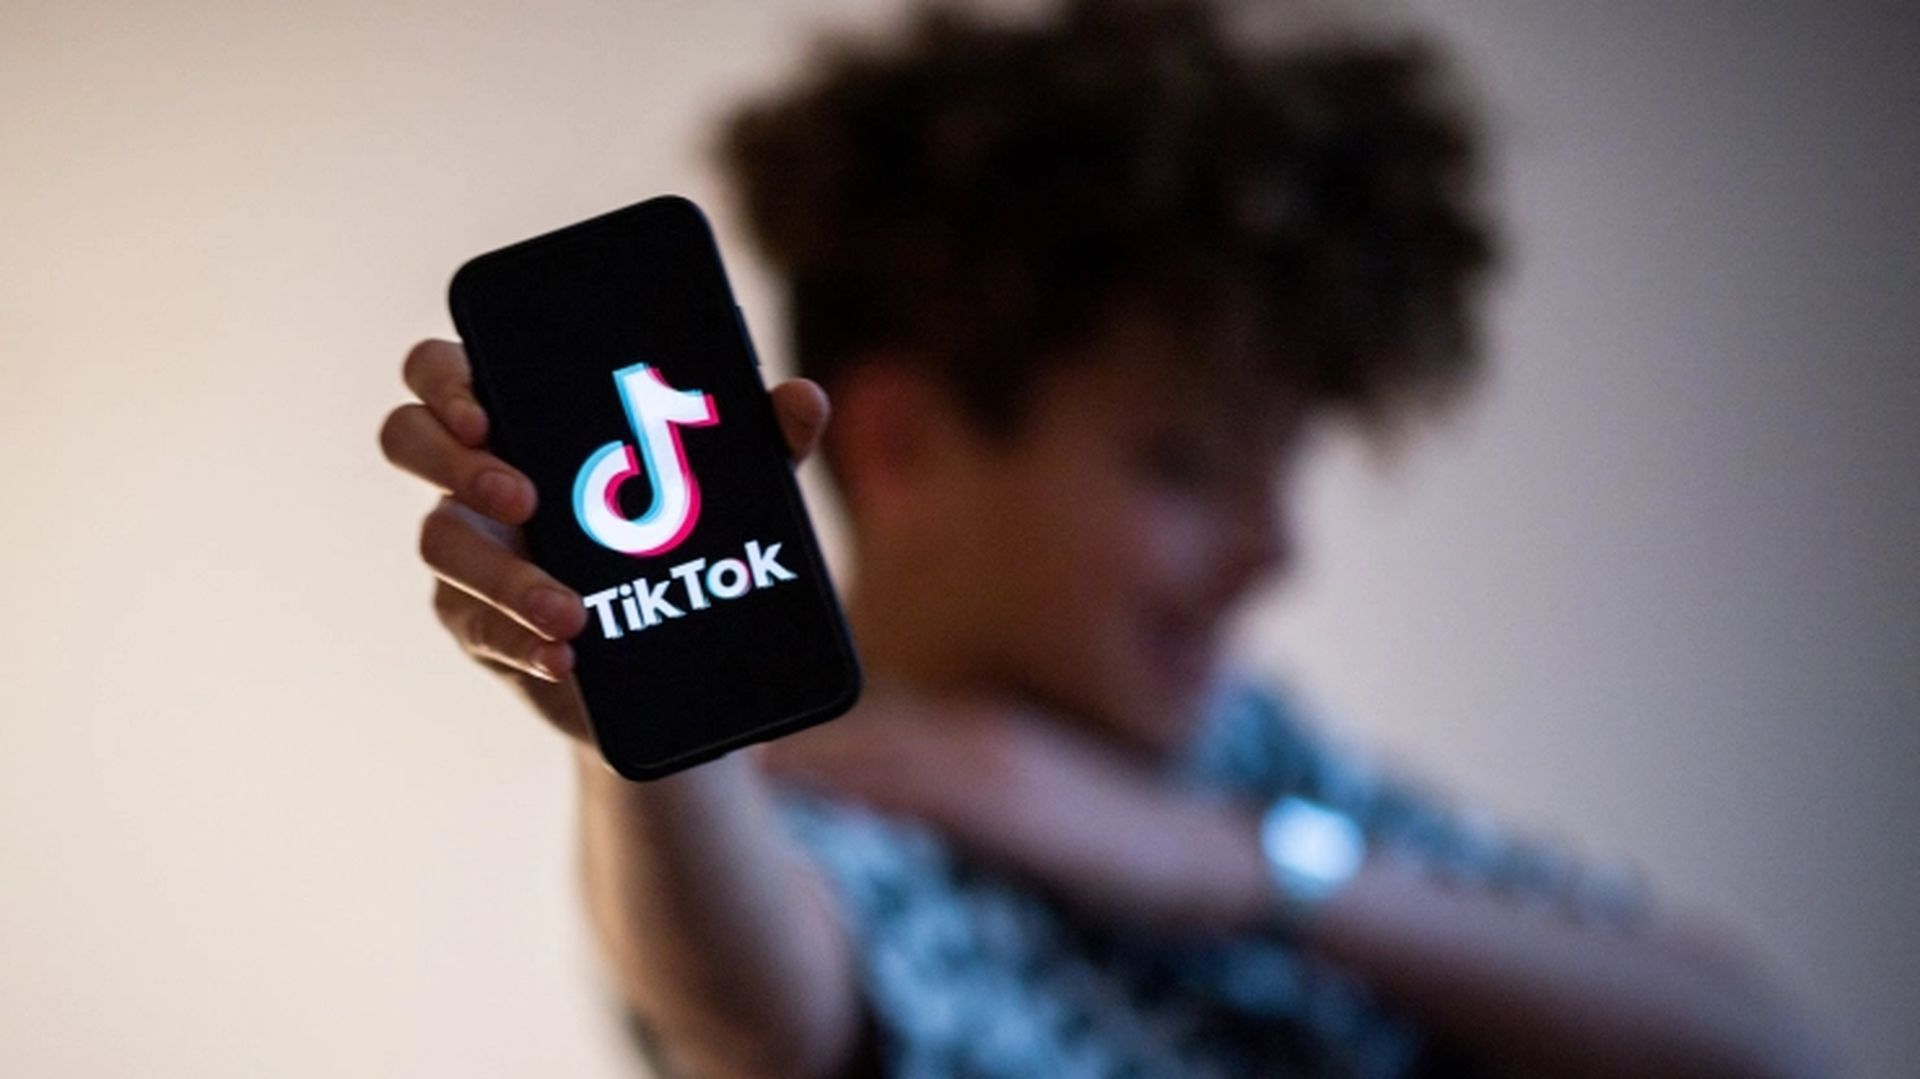 In this article, we are going to be going over how to change your birthday on TikTok, so you can correct the age displayed on your profile.